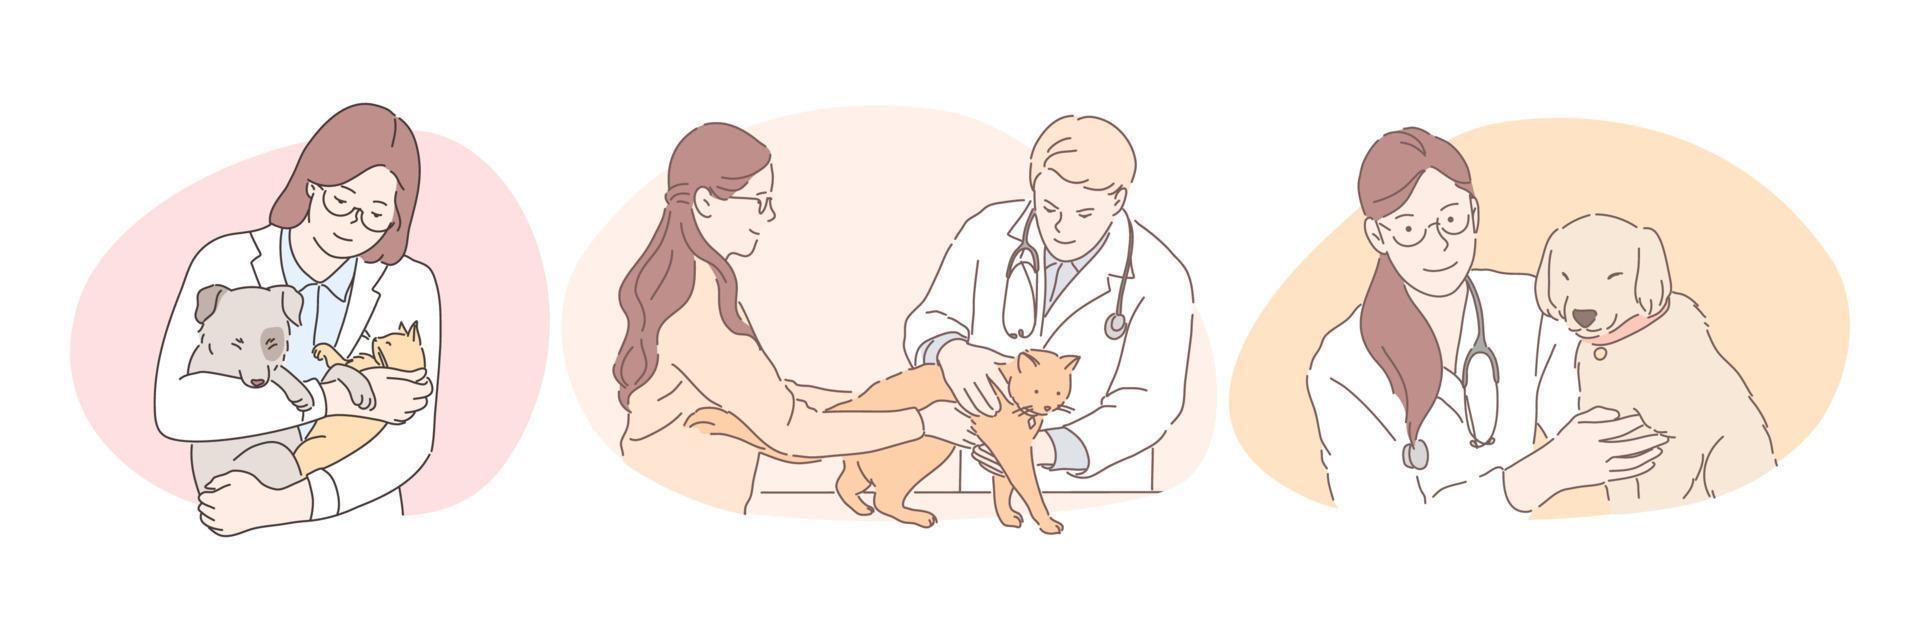 Professional veterinarian with pets during work concept. Young confident man and women doctors veterinarians in white uniform examining and curing dogs and cats in medical clinic offices vector